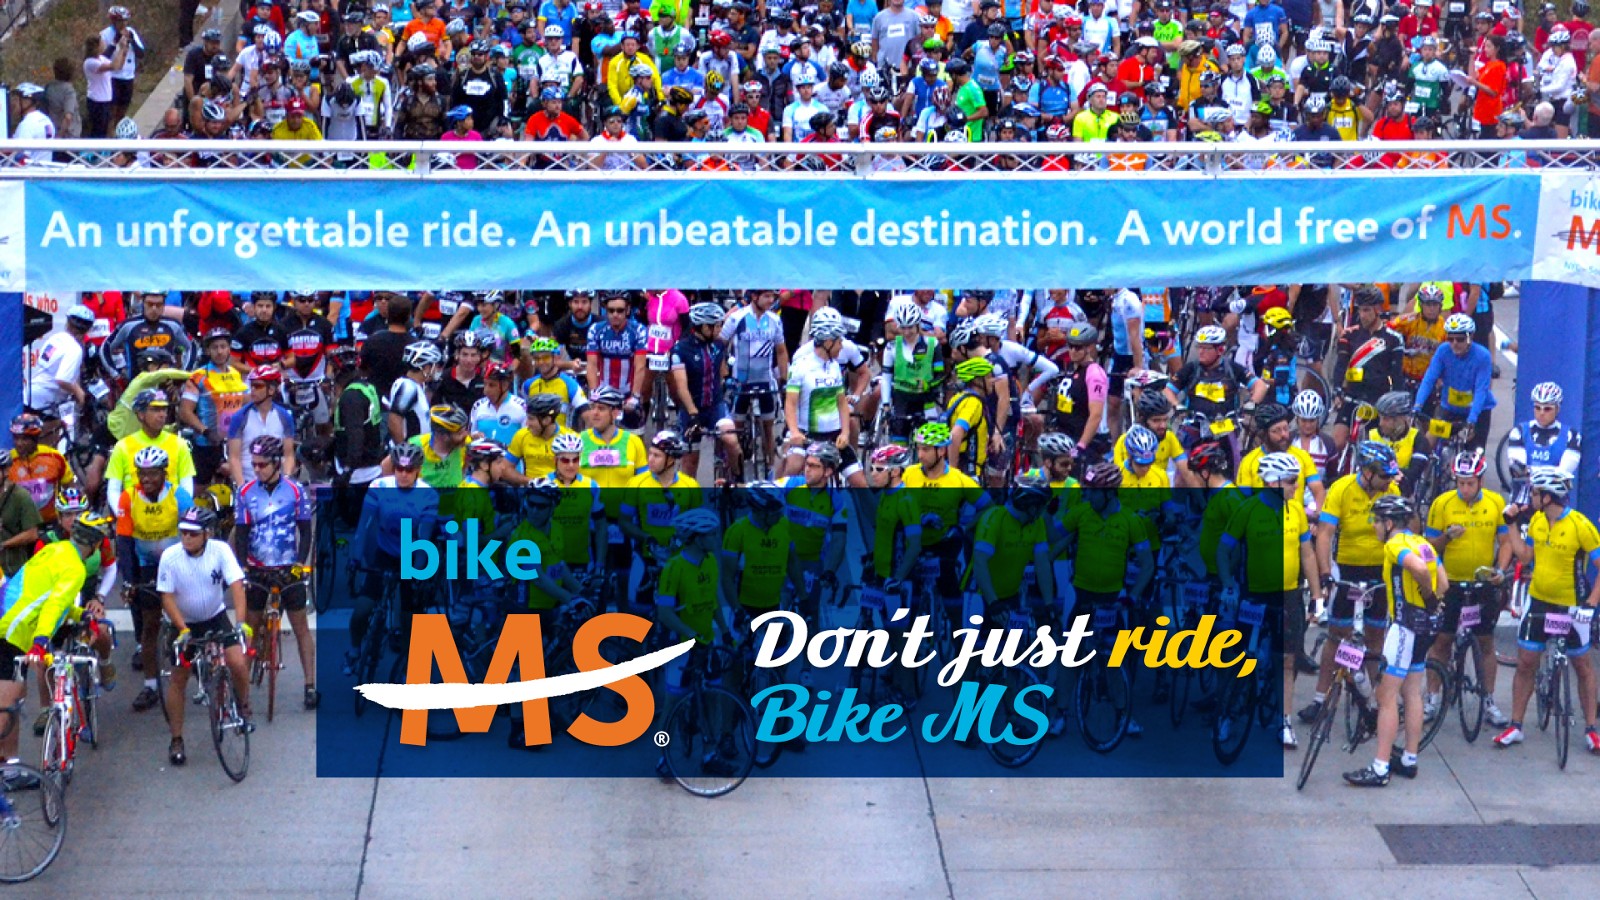 Facebook cover image depicting a large crowd at a start line